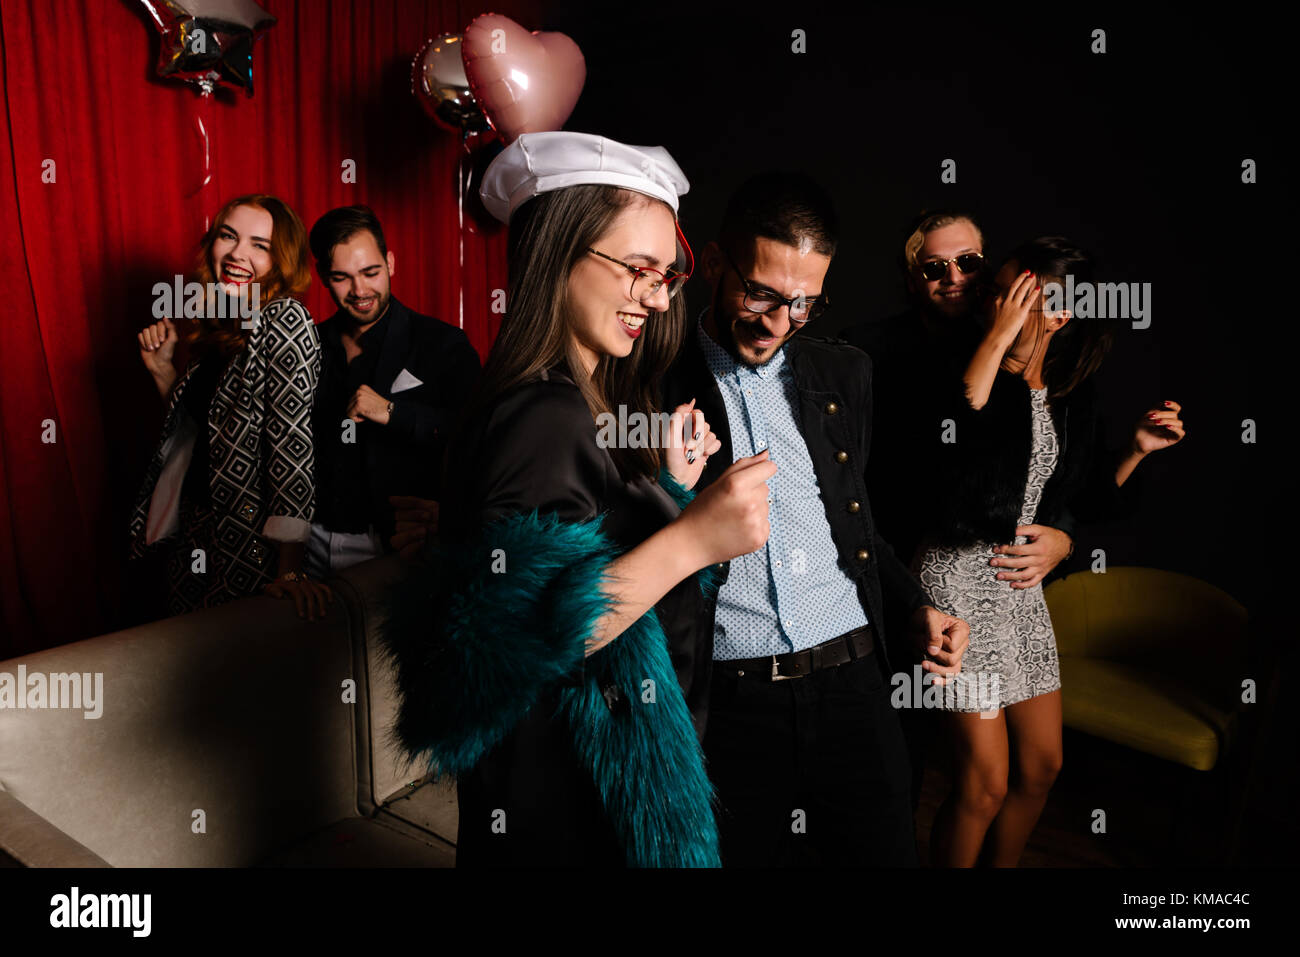 Couple of friends dancing at a party Stock Photo